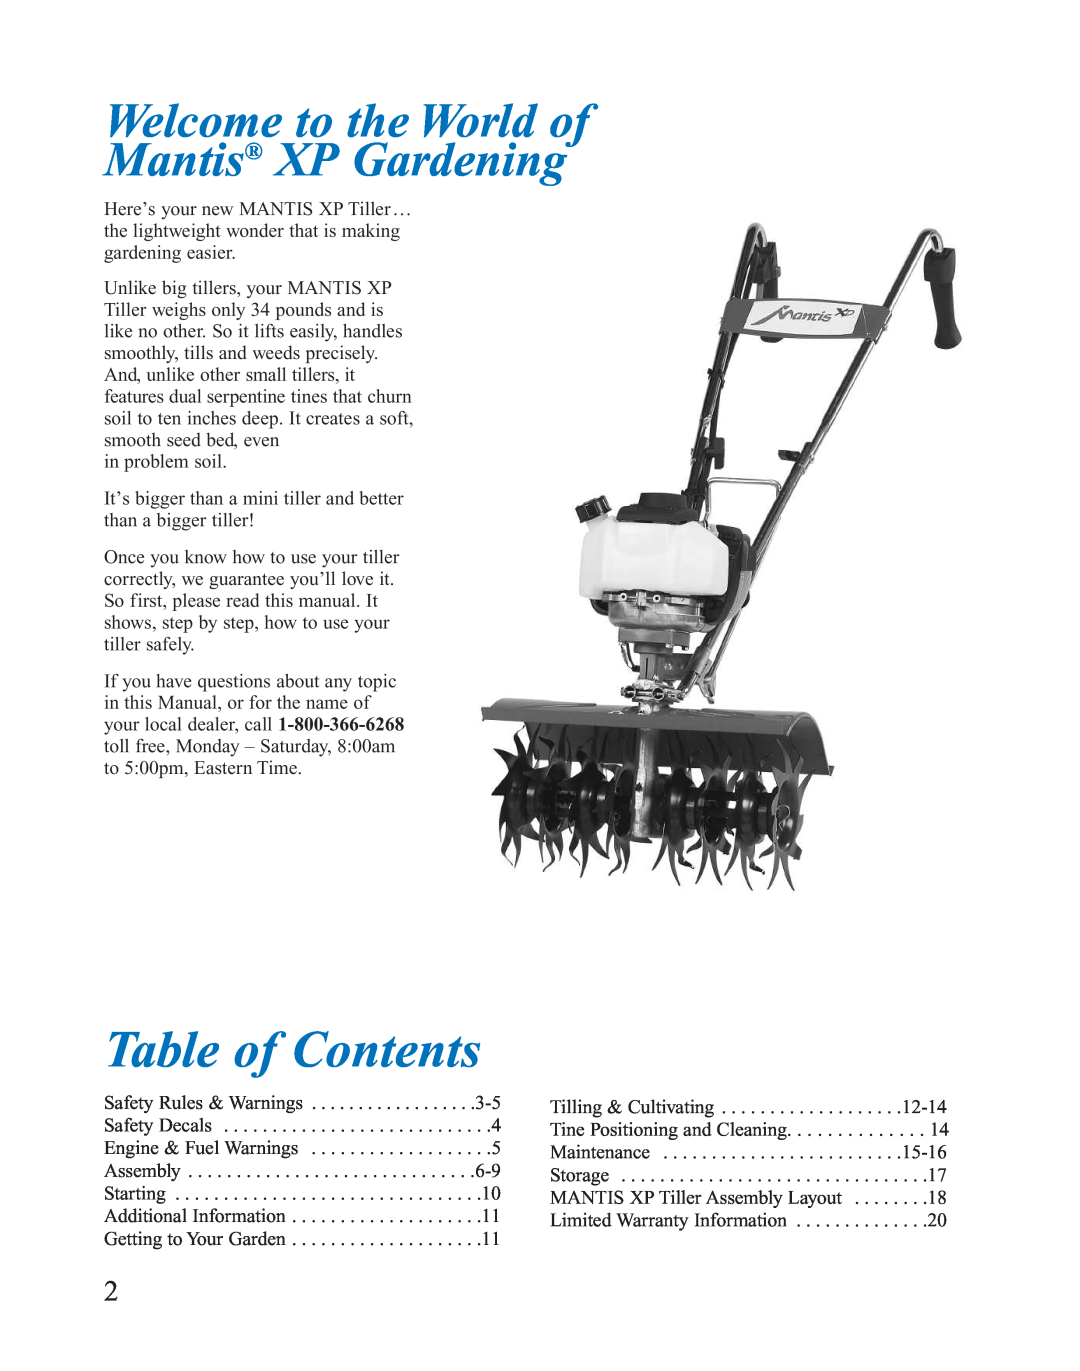 Mantis 401764 XP owner manual Table of Contents, Welcome to the World of Mantis XP Gardening 